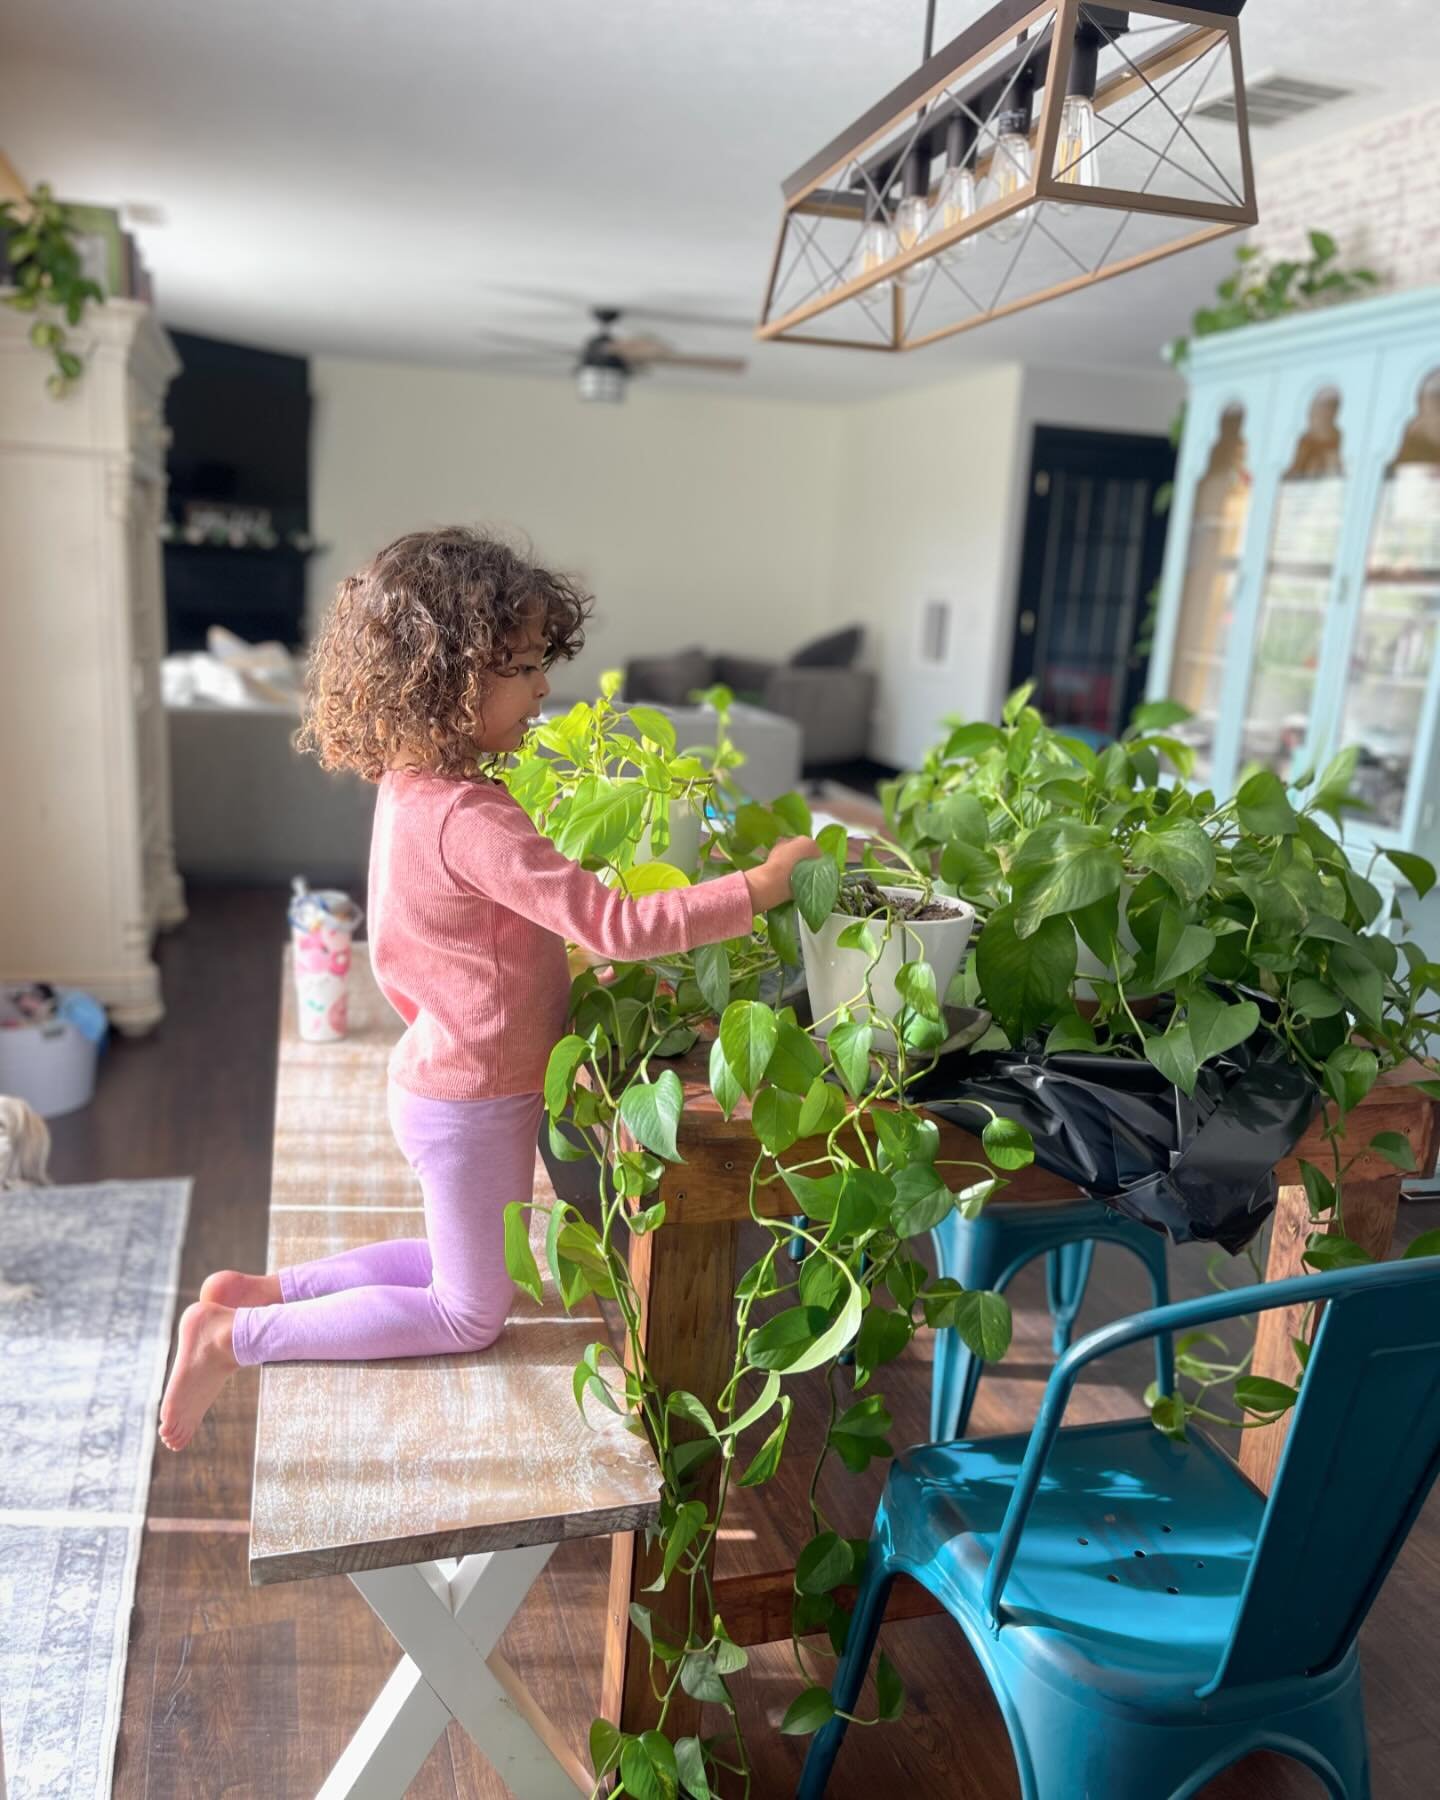 This chilly Indiana Saturday morning consisted of caring for my plant babies. These pothos don&rsquo;t require a ton of work, it&rsquo;s done on a biweekly basis. 

I loved sharing this experience with Juliana. She learned all about watering and how 